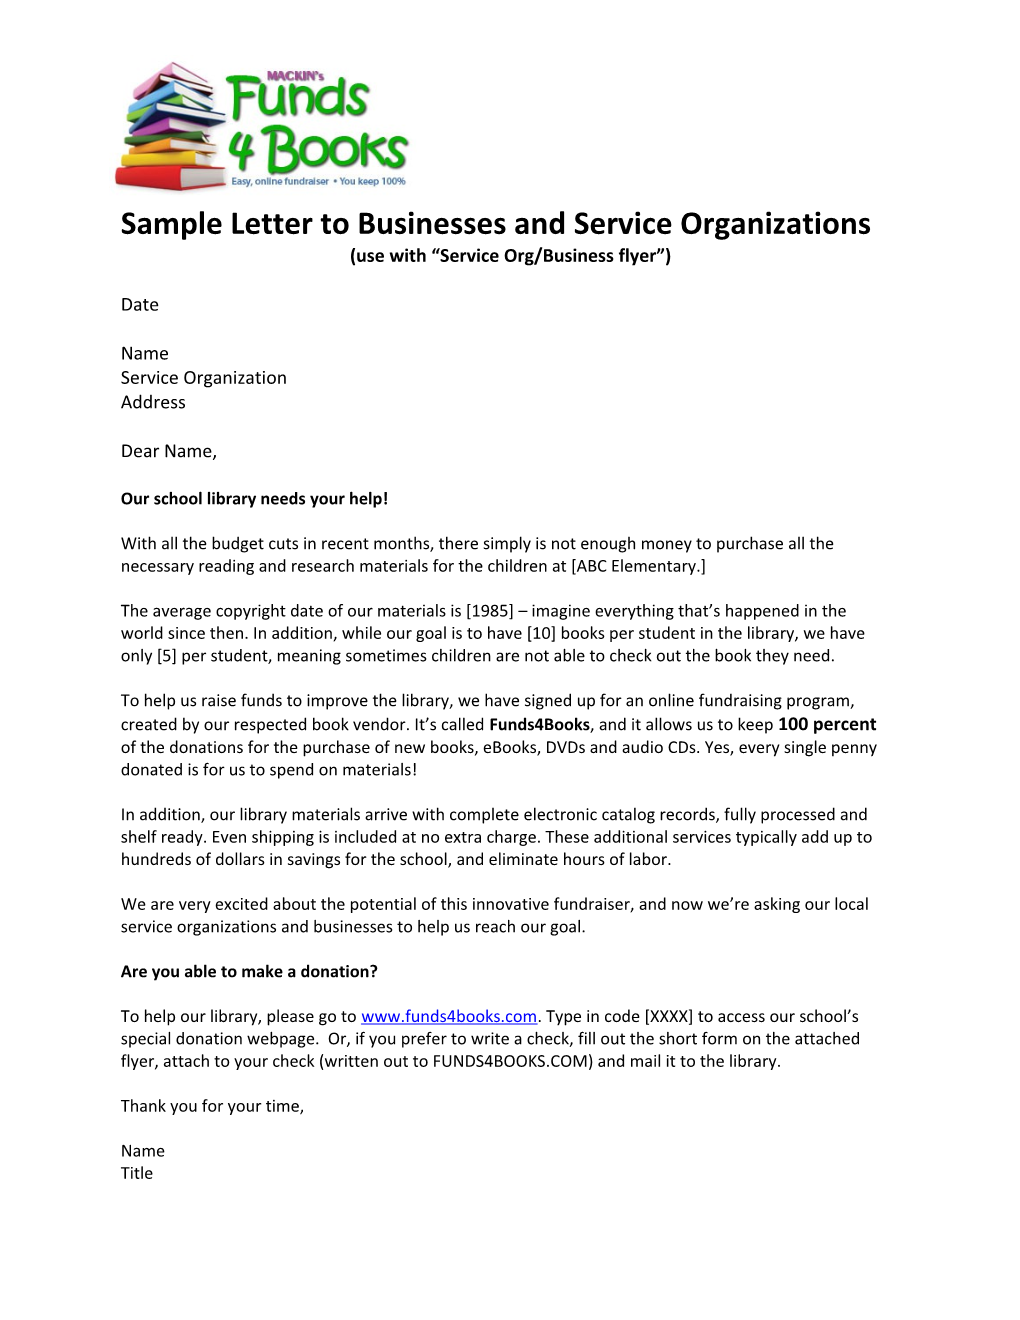 Sample Letter to Businesses and Service Organizations